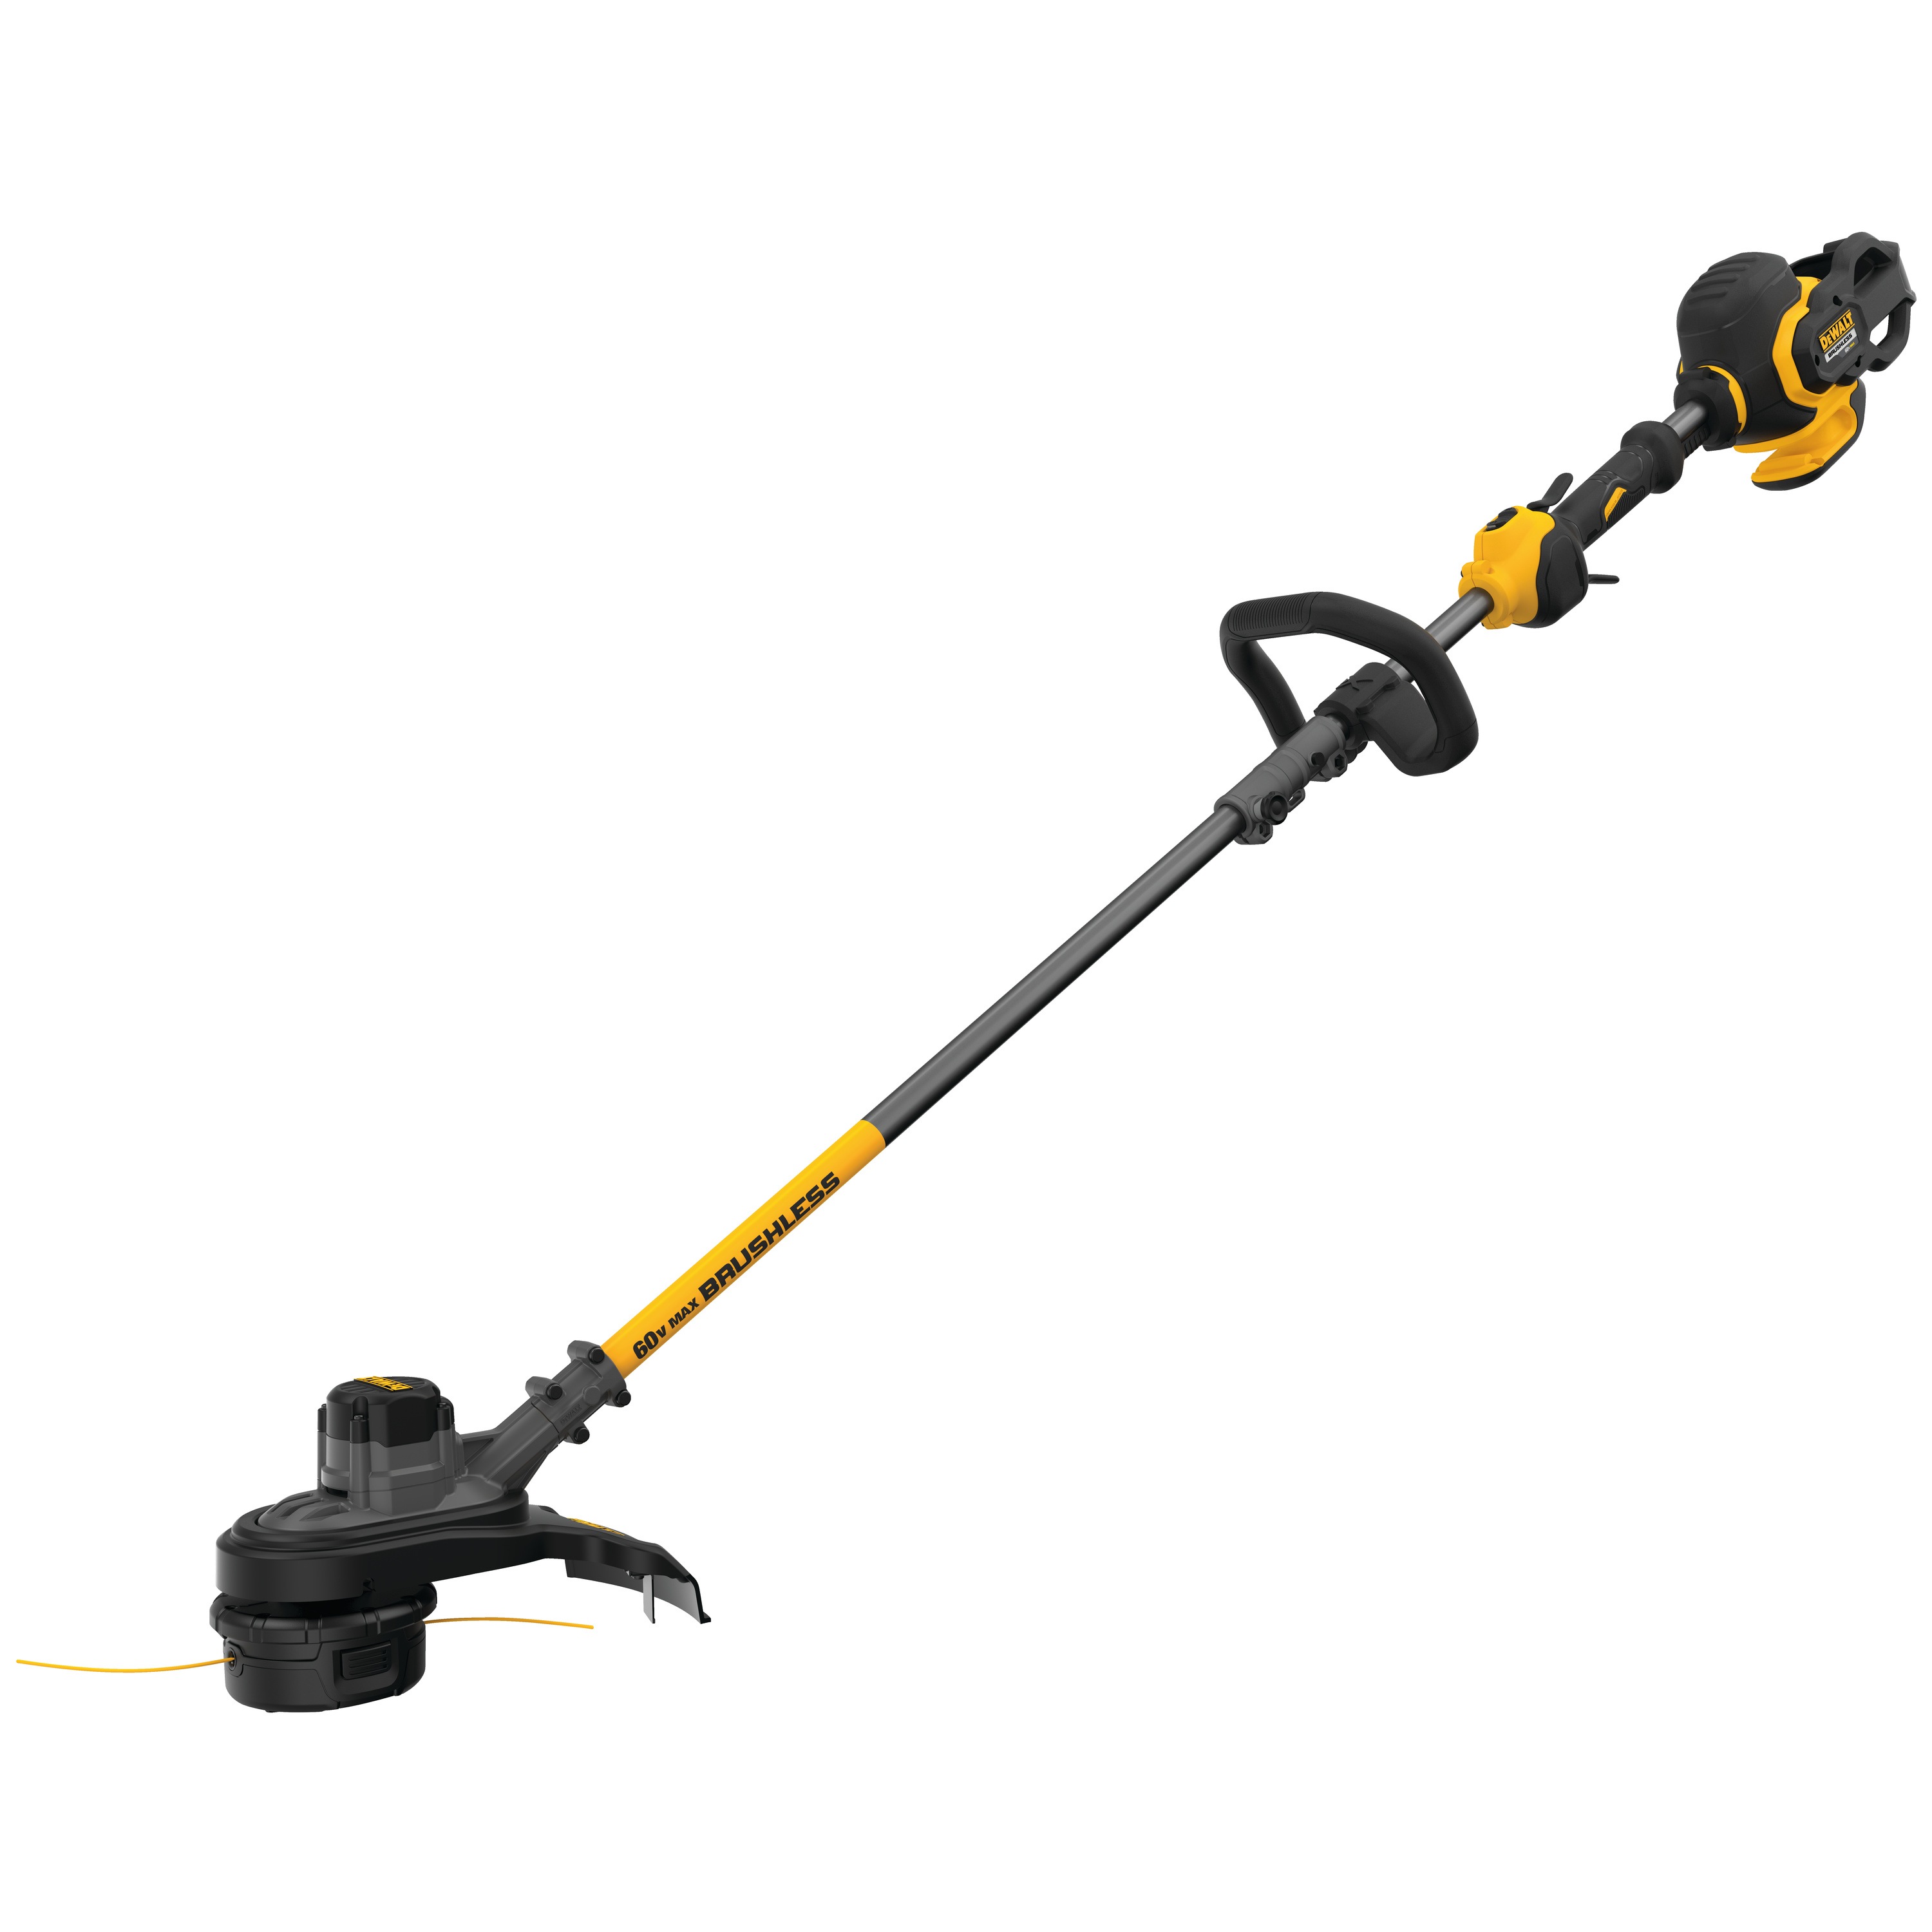 profile of Cordless String Trimmer.